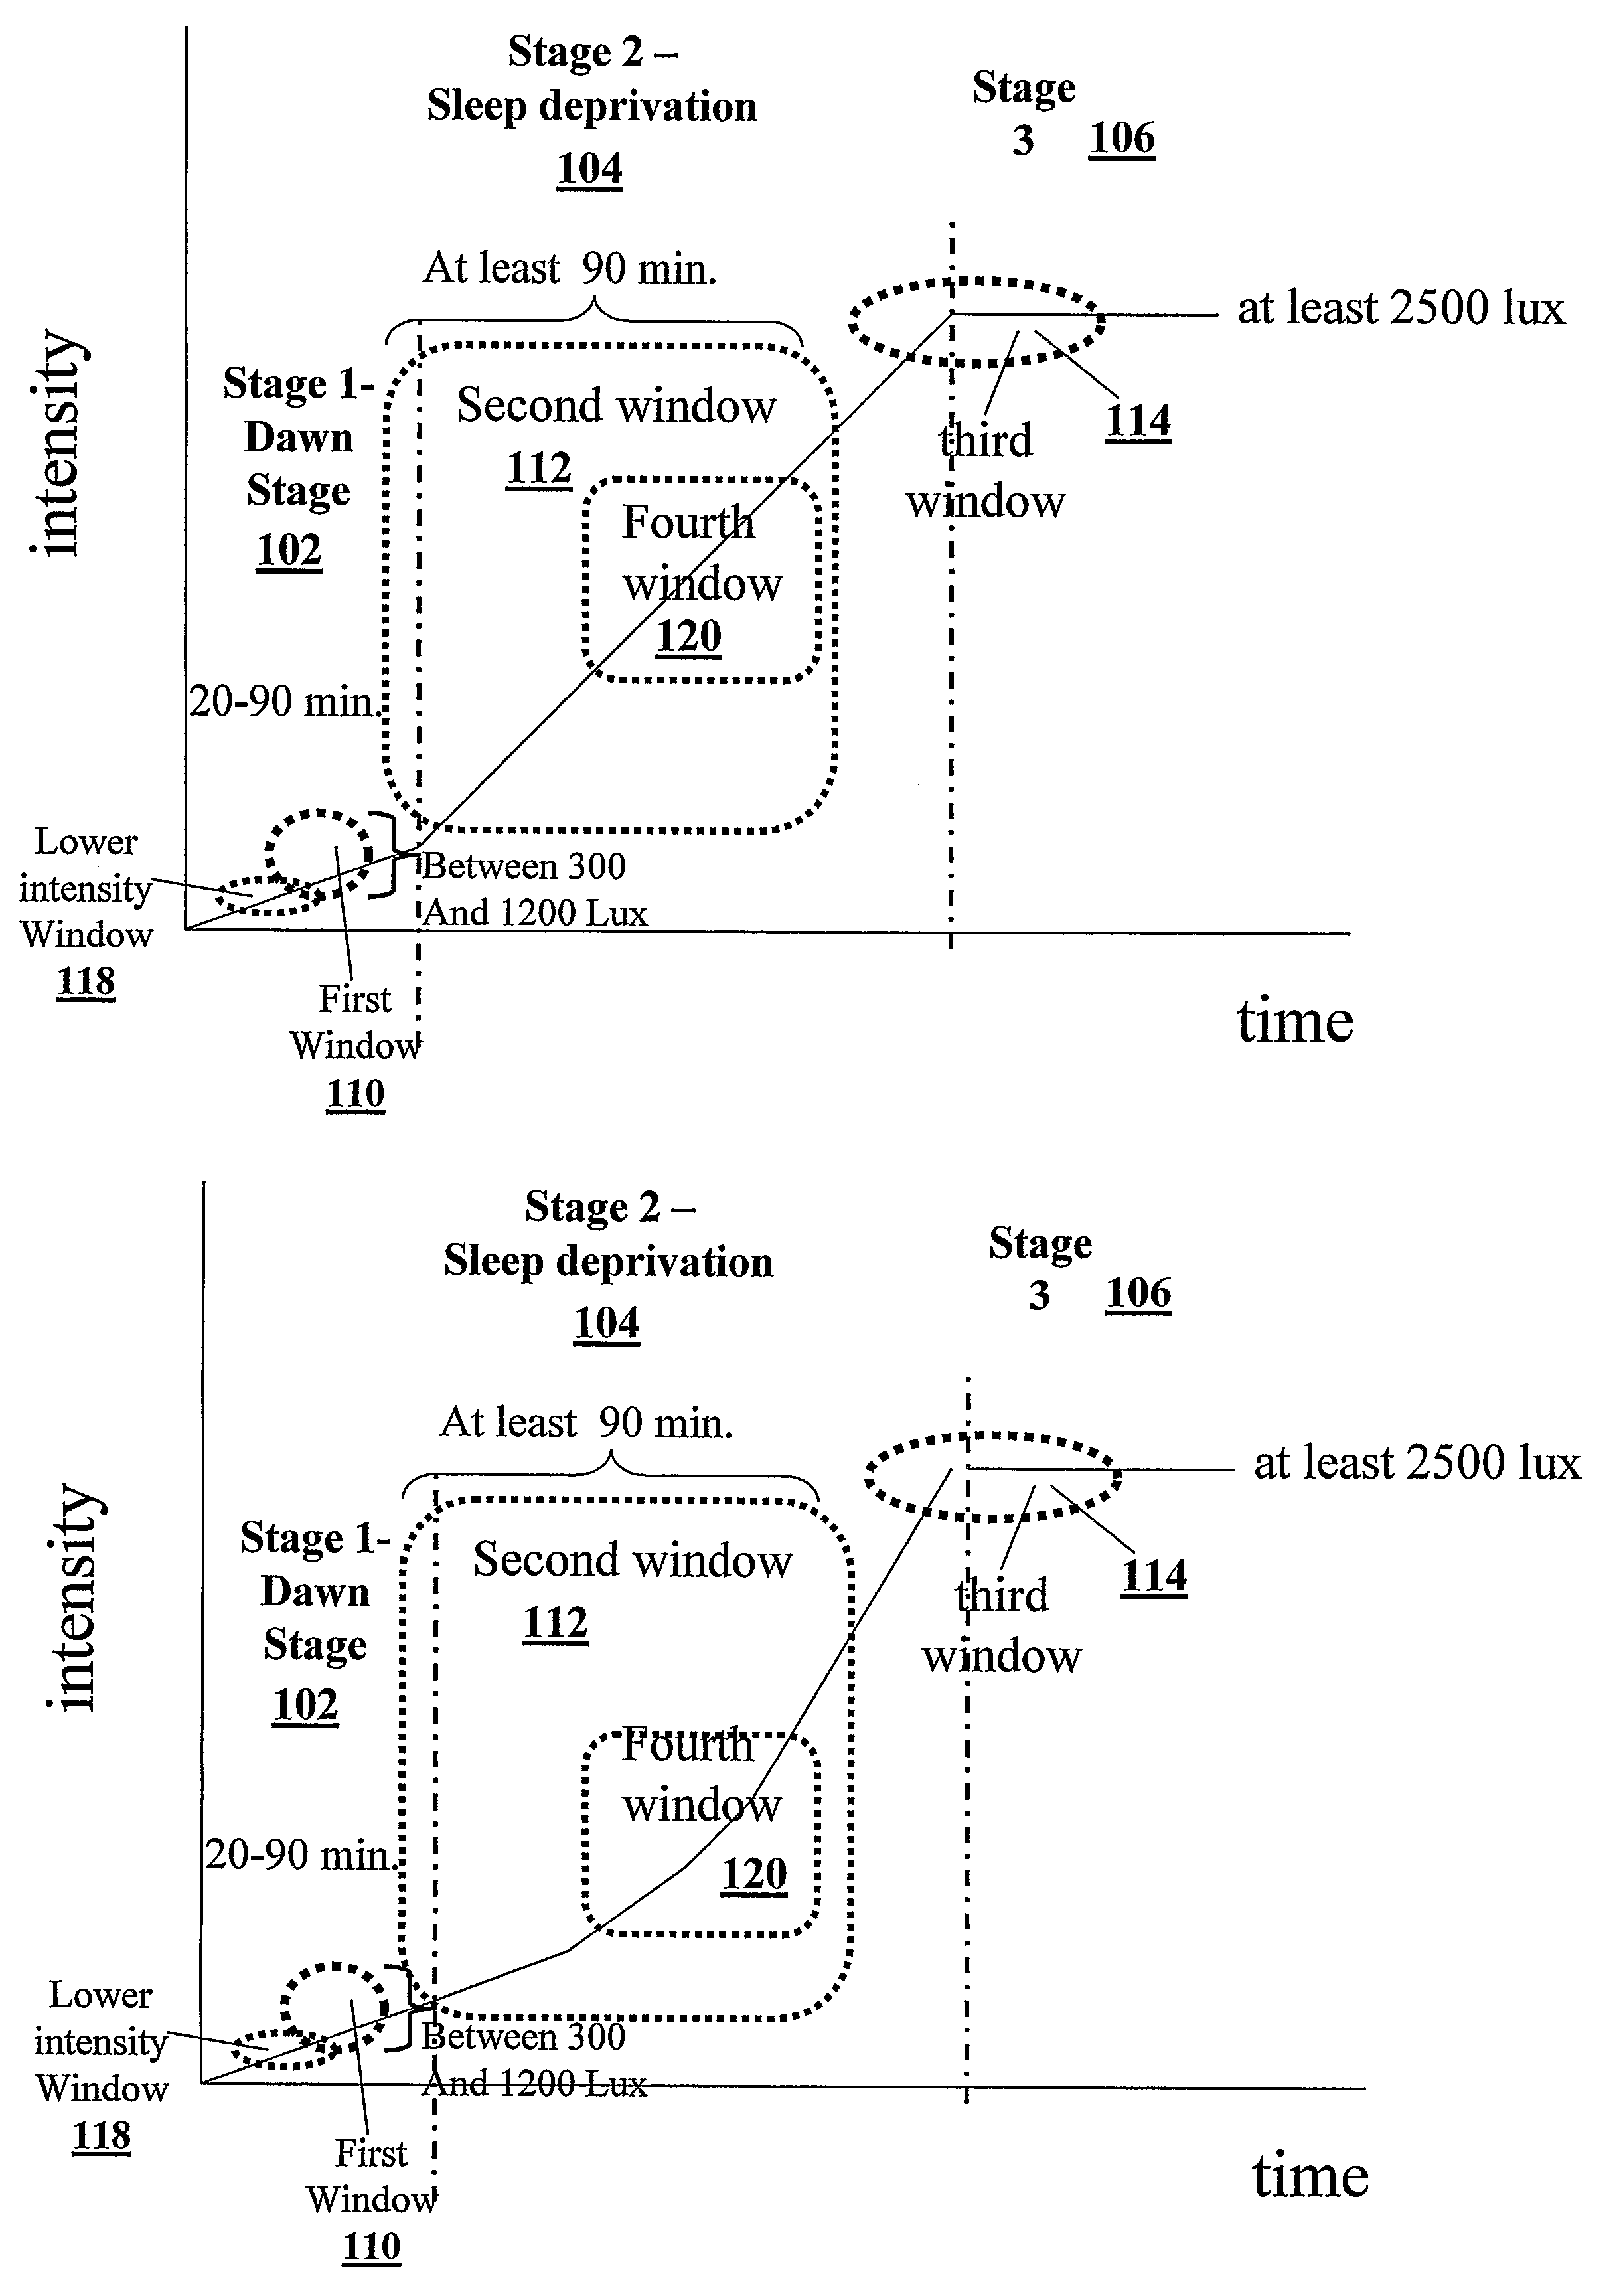 Apparatus and method for providing a multi-stage light treatment